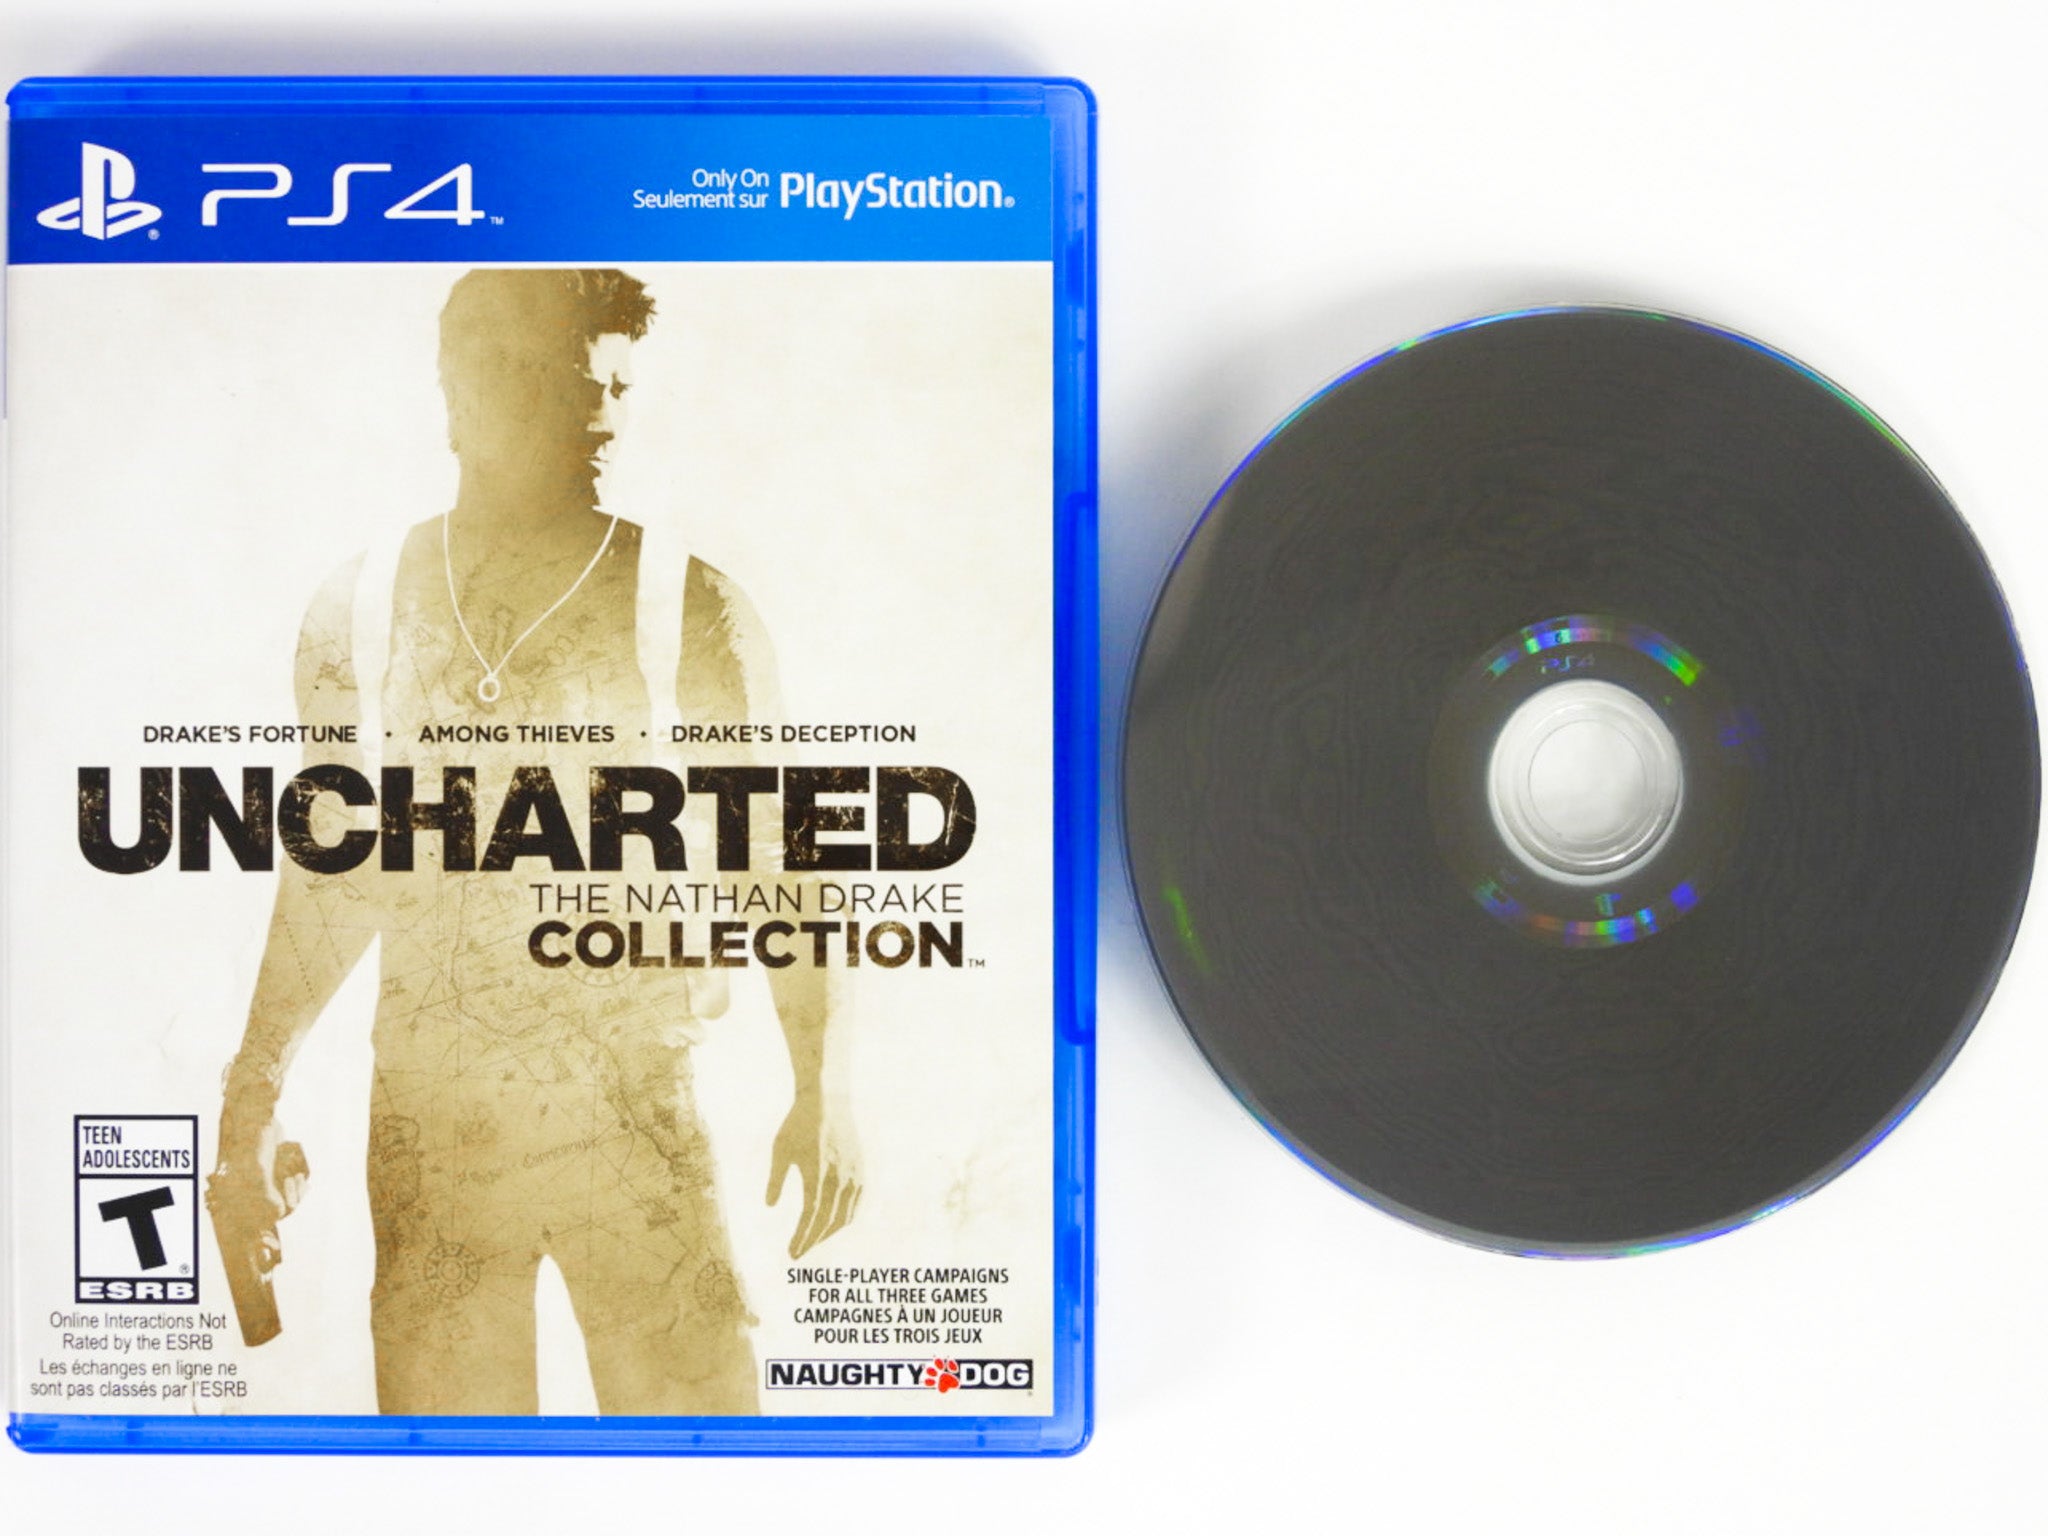 Uncharted The Nathan Drake PS4) / – (Playstation RetroMTL Collection 4